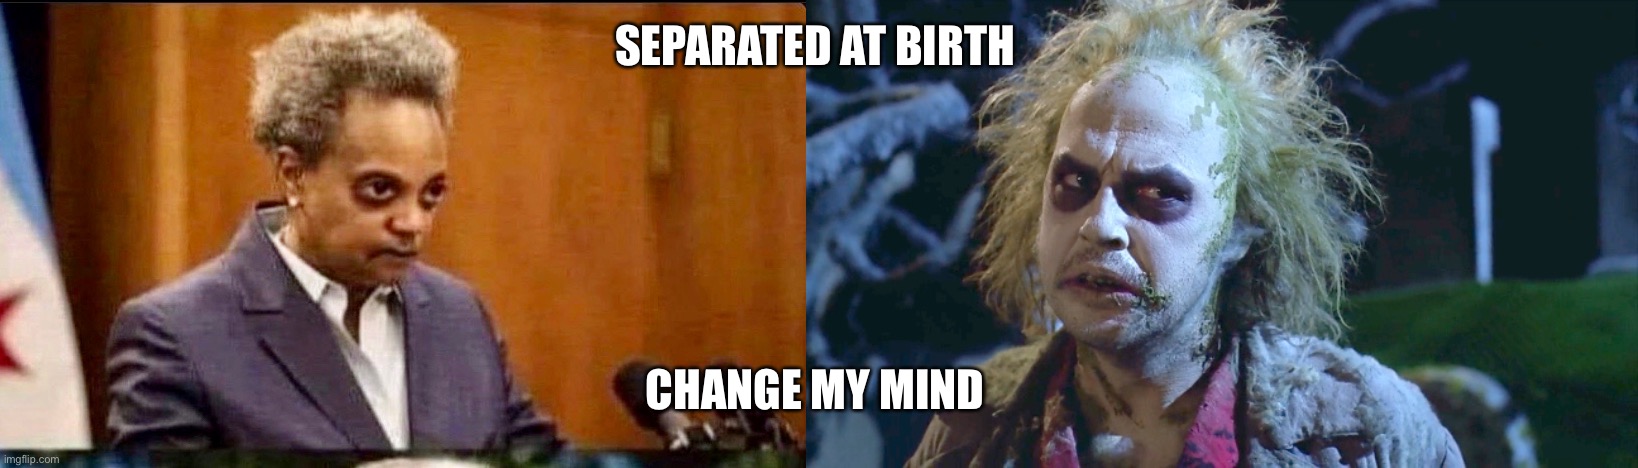 SEPARATED AT BIRTH; CHANGE MY MIND image tagged in beetlejuice made w/ Imgf...